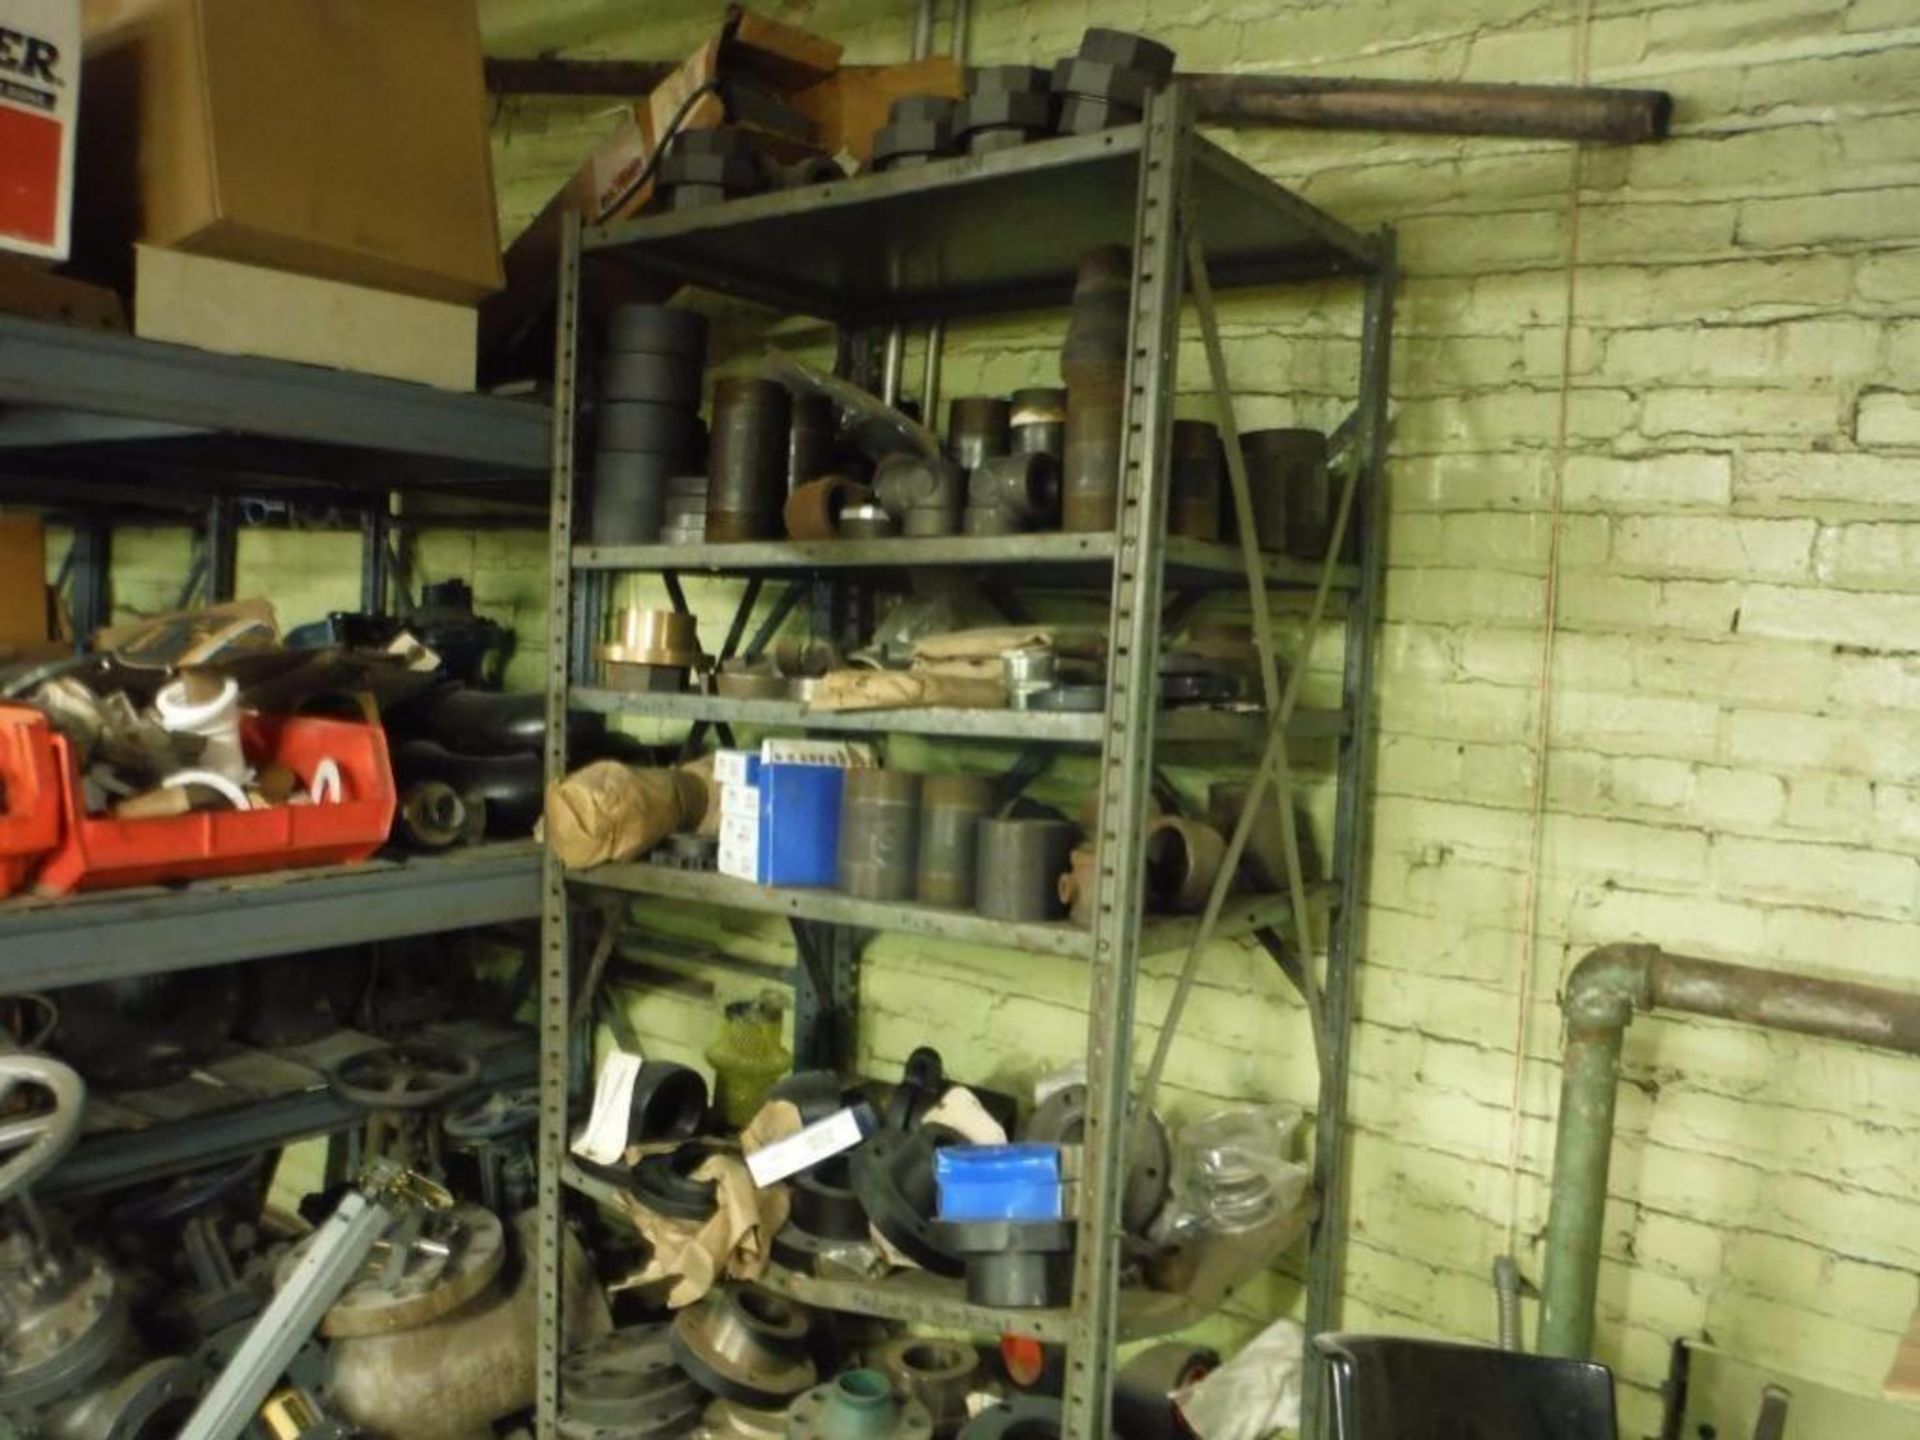 10 Shelves & content: Miscellaneous valves, fittings, brushes, and parts  Rigging Fee: $1000 - Image 5 of 14